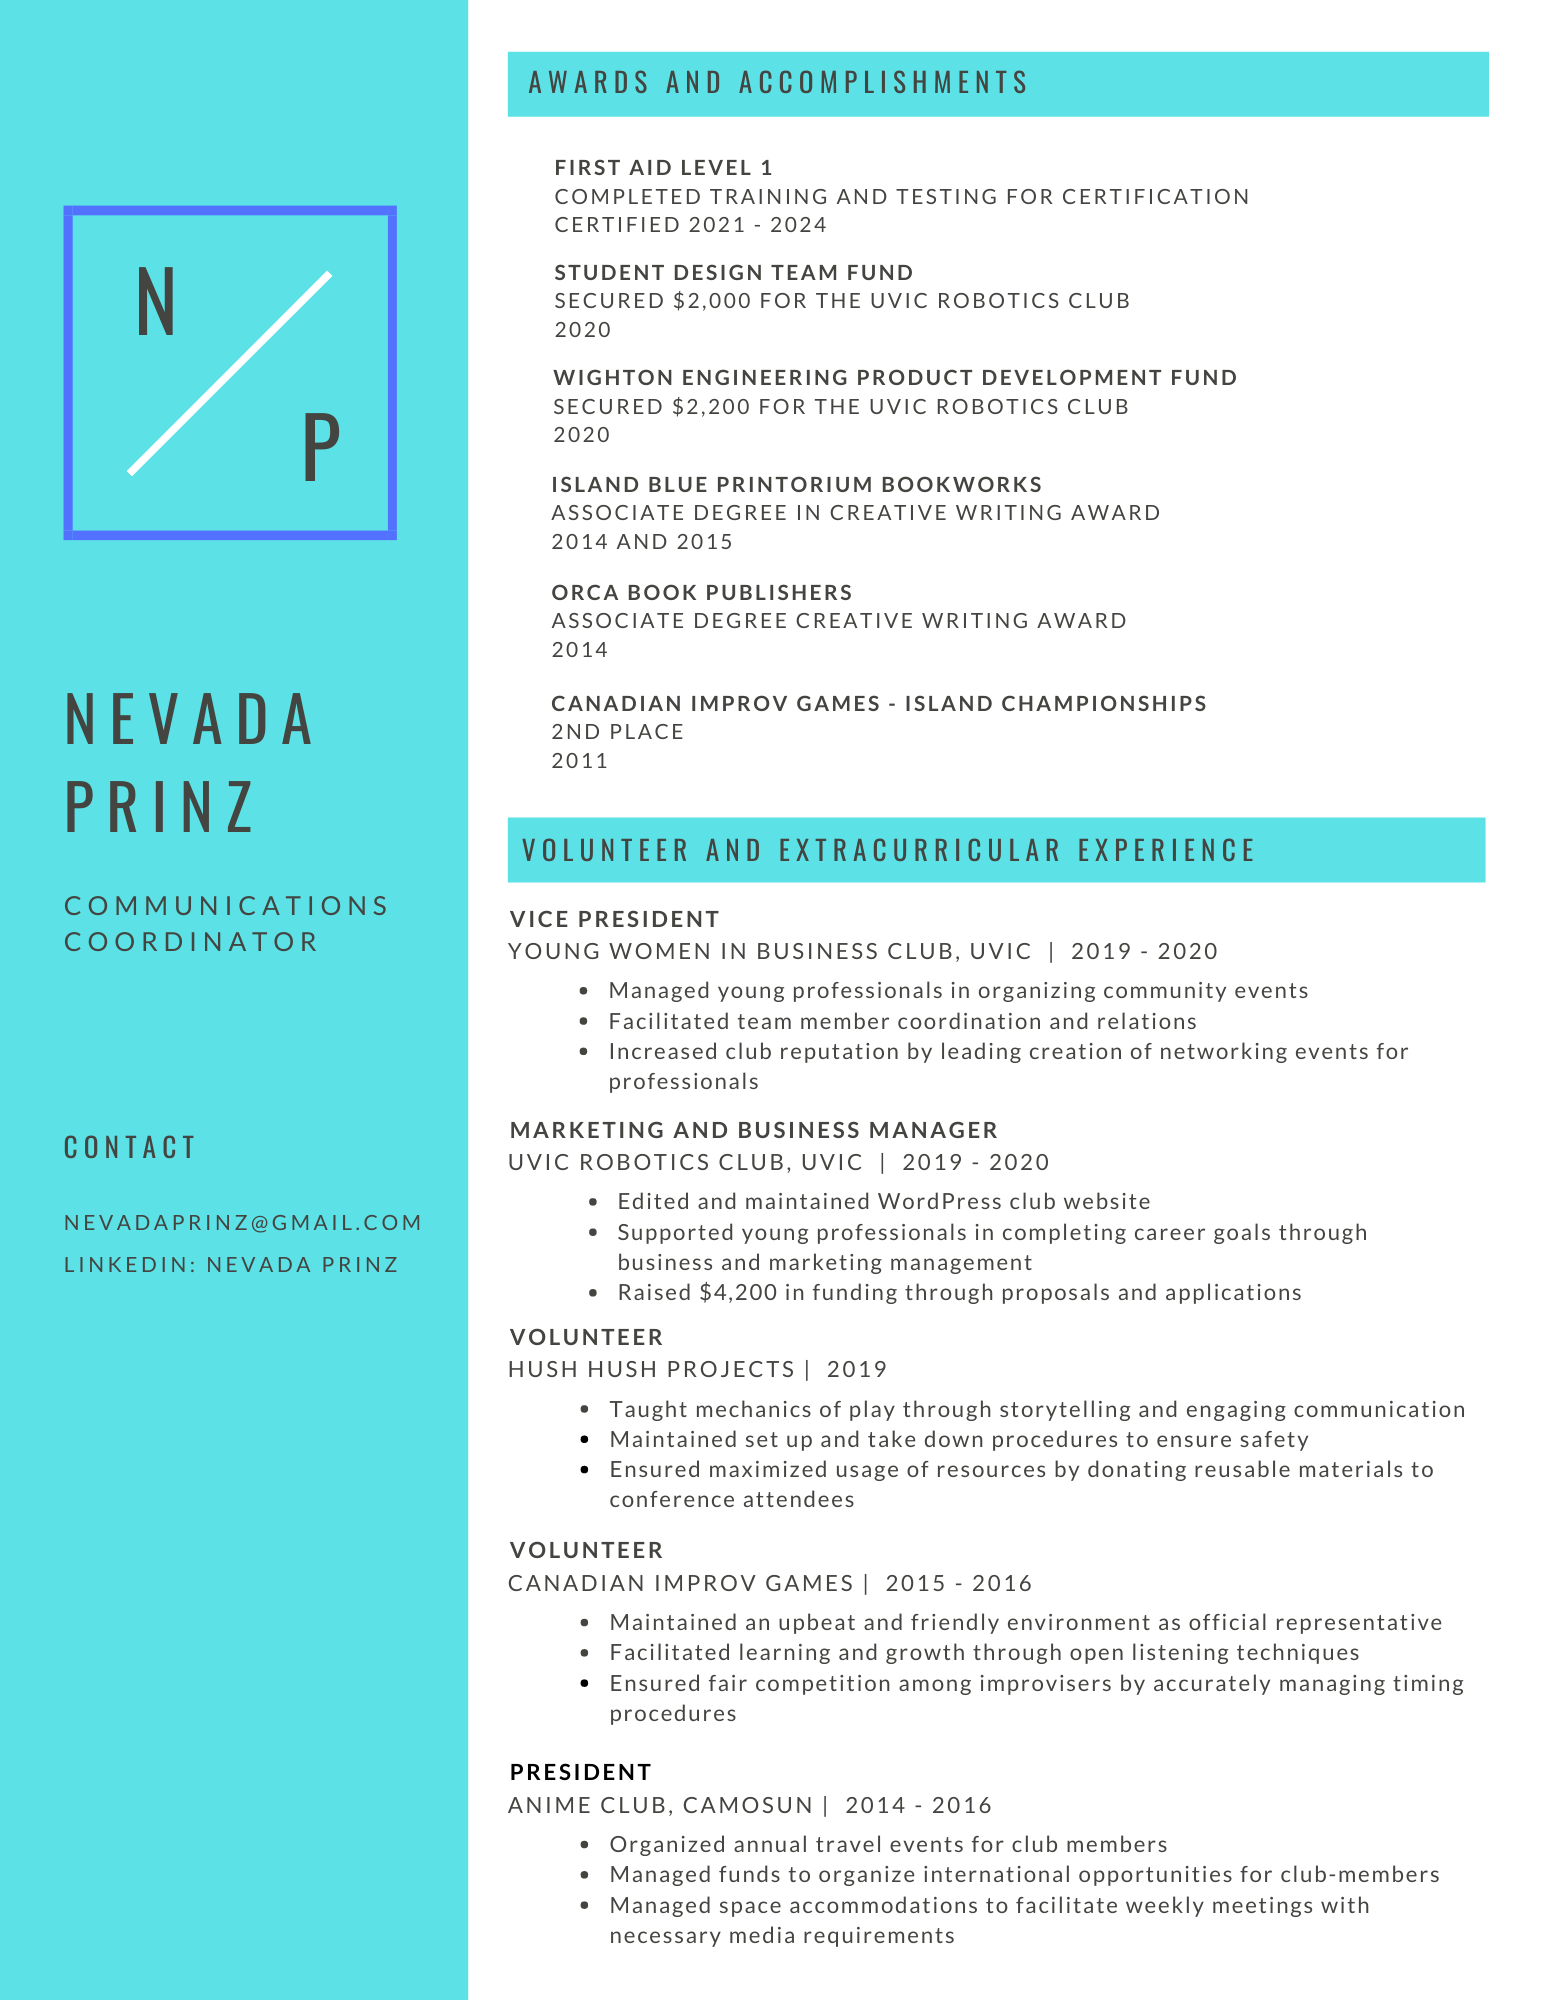 Resume Page 2